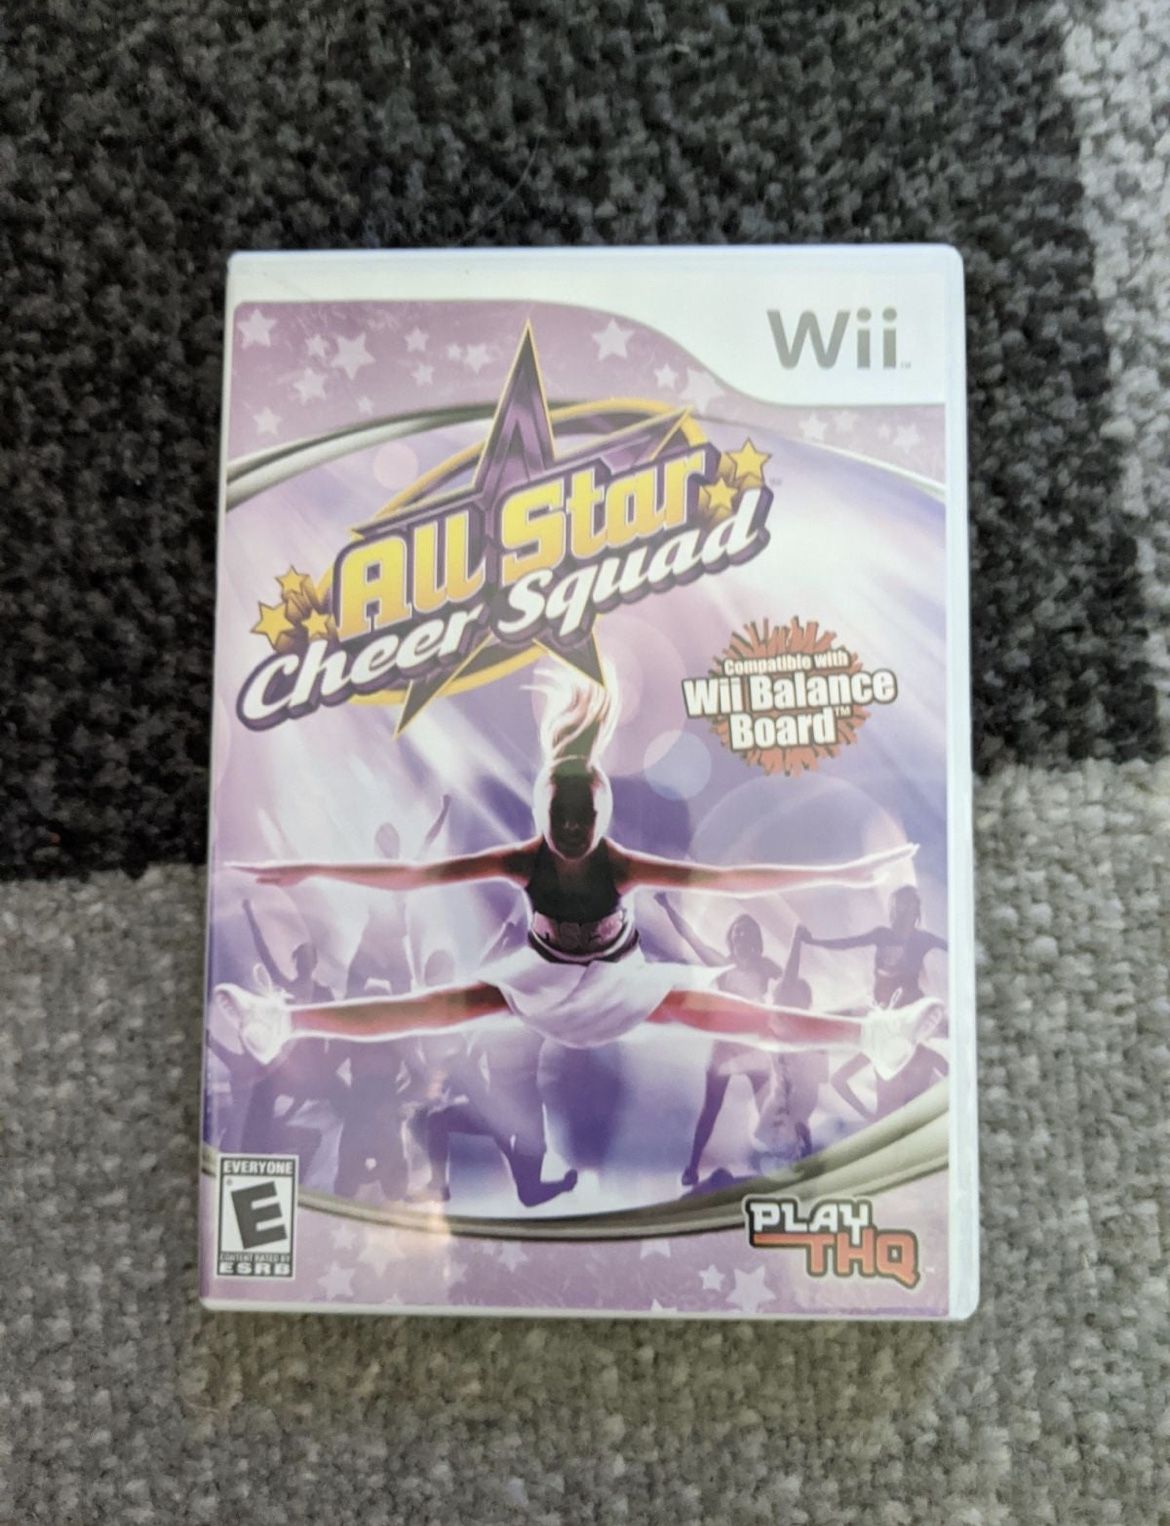 All Star Cheer Squad for Wii